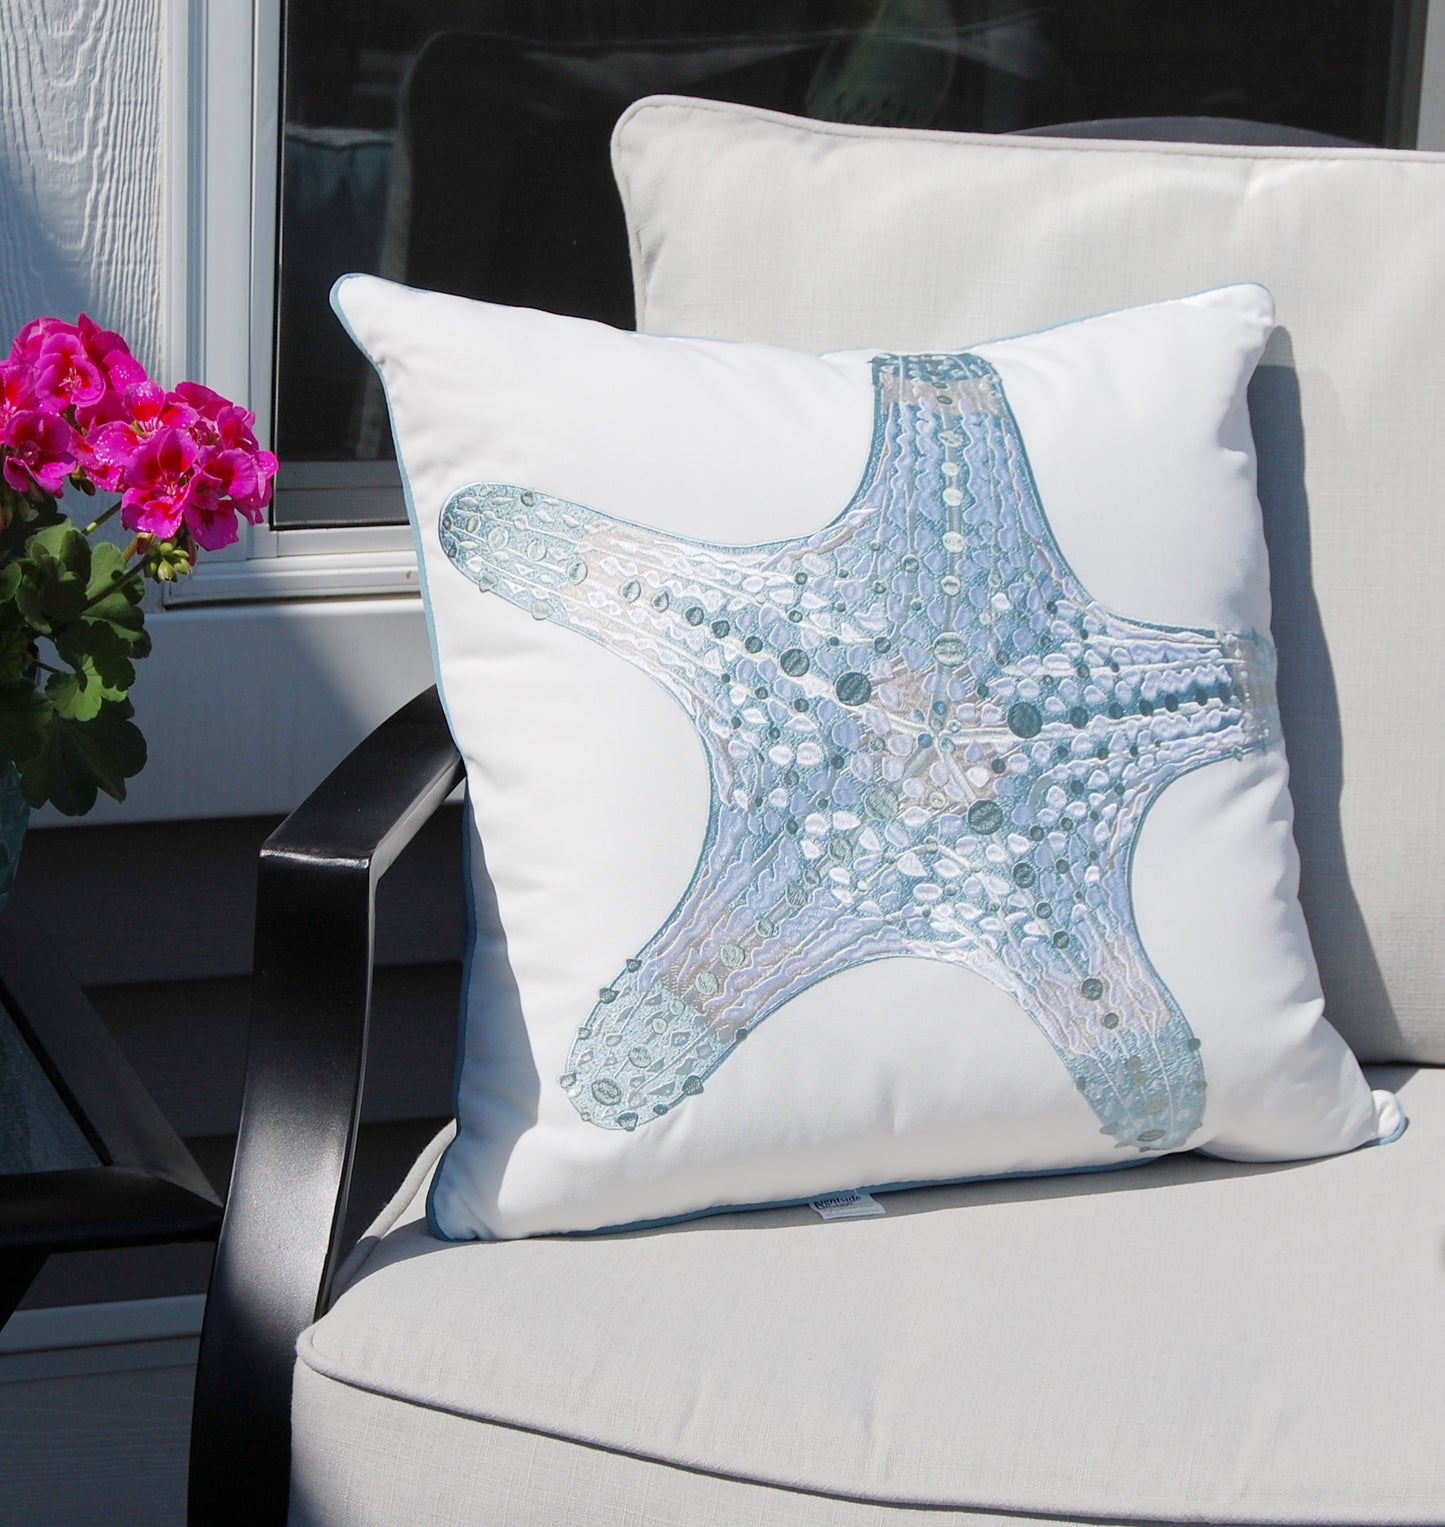 Sea Glass Sea Star outdoor pillow styled on a patio chair.